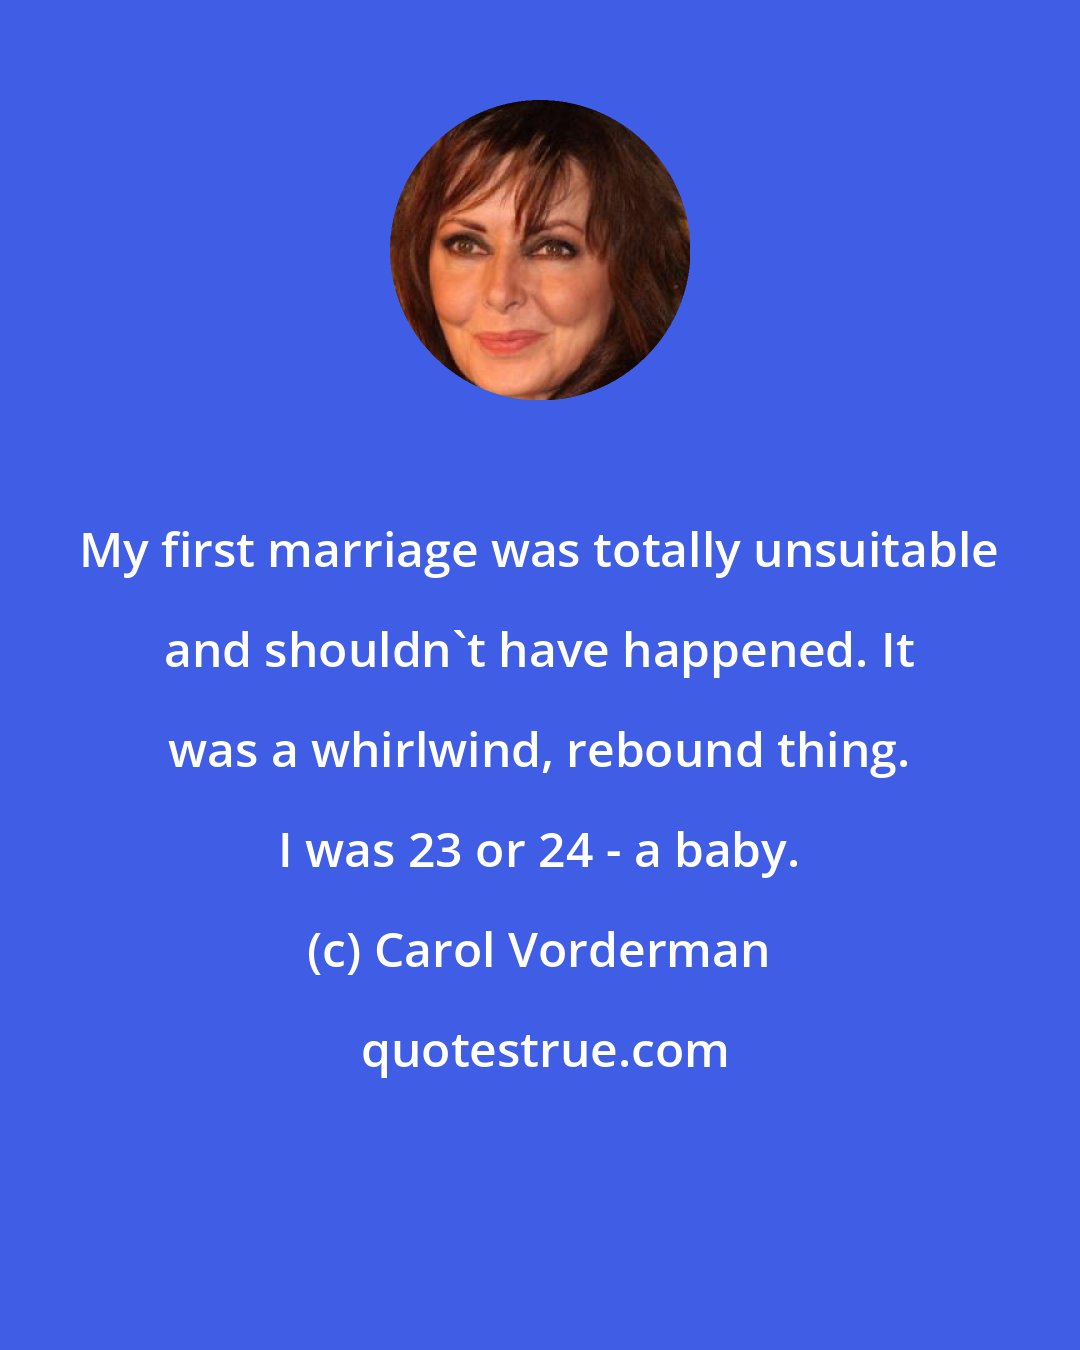 Carol Vorderman: My first marriage was totally unsuitable and shouldn't have happened. It was a whirlwind, rebound thing. I was 23 or 24 - a baby.